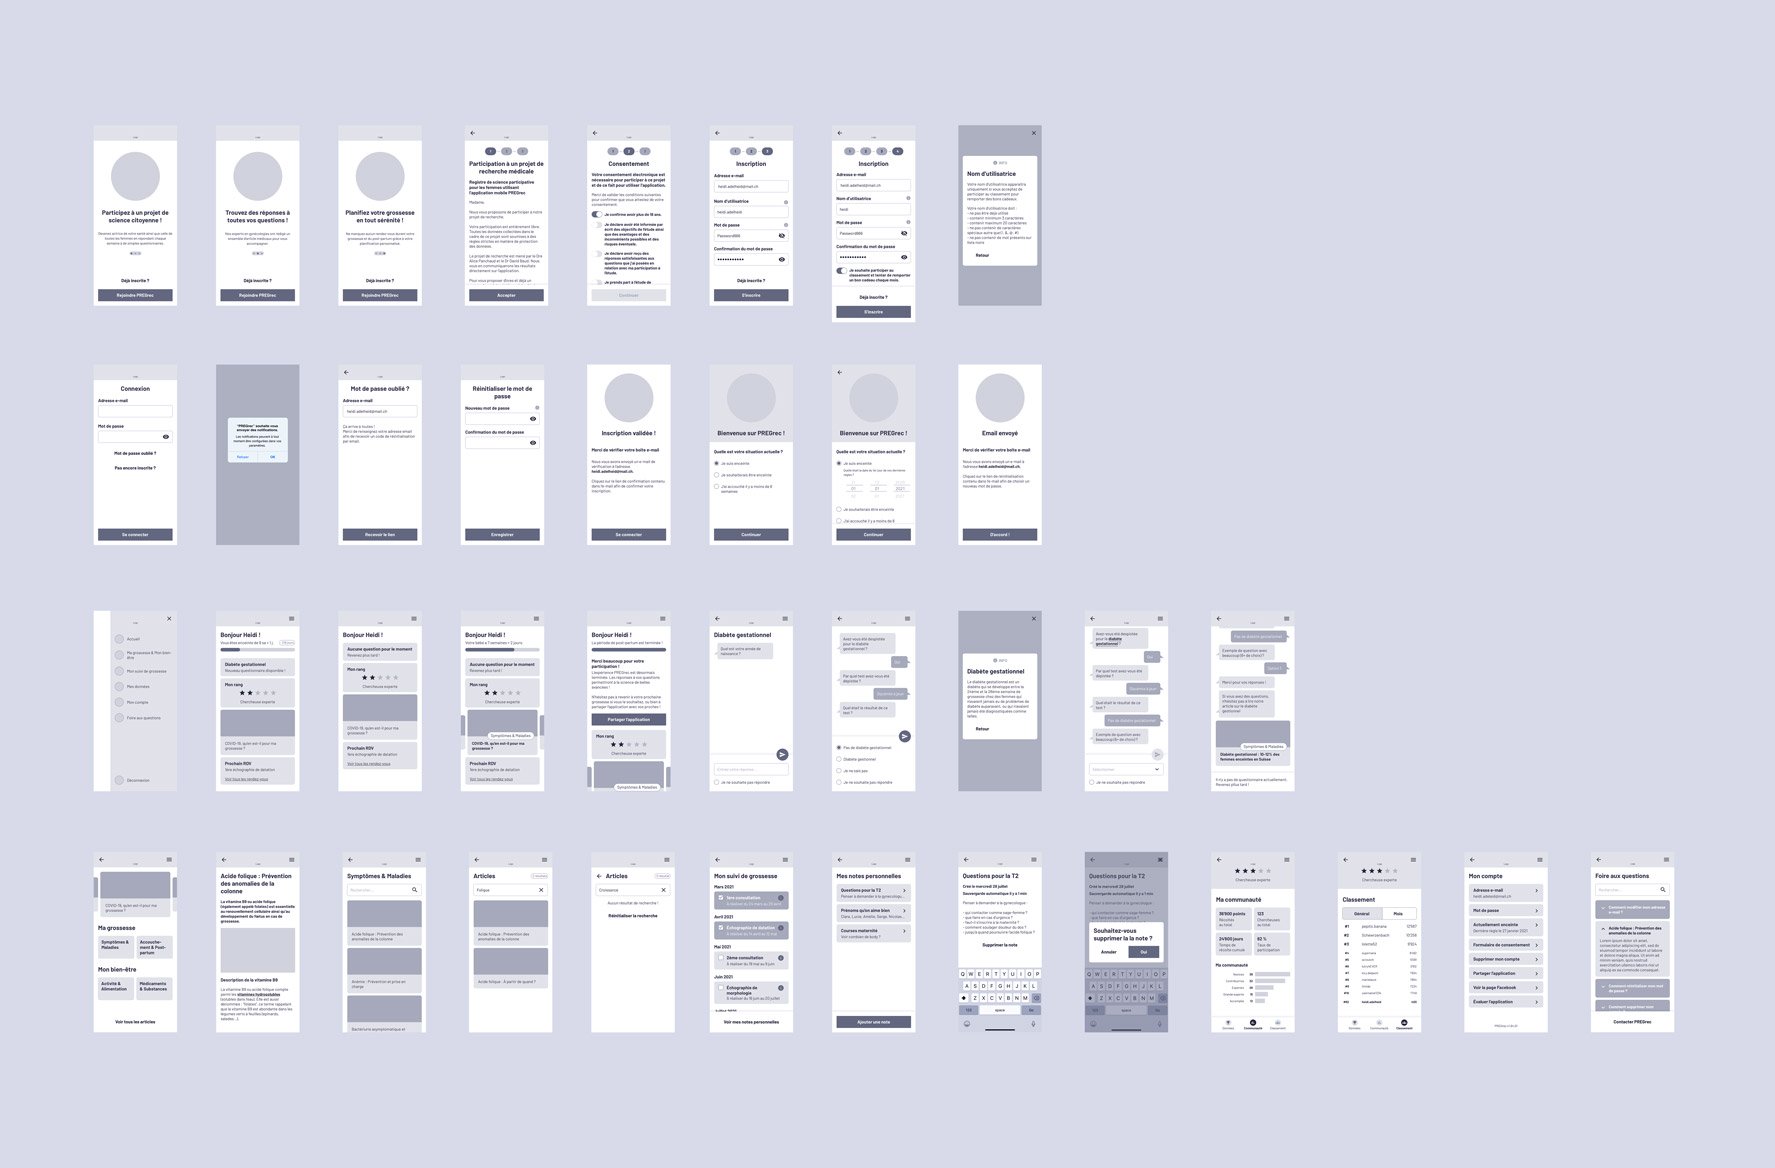 Wireframes allow to forget about the aesthetic and to focus solely on the user journey features and content